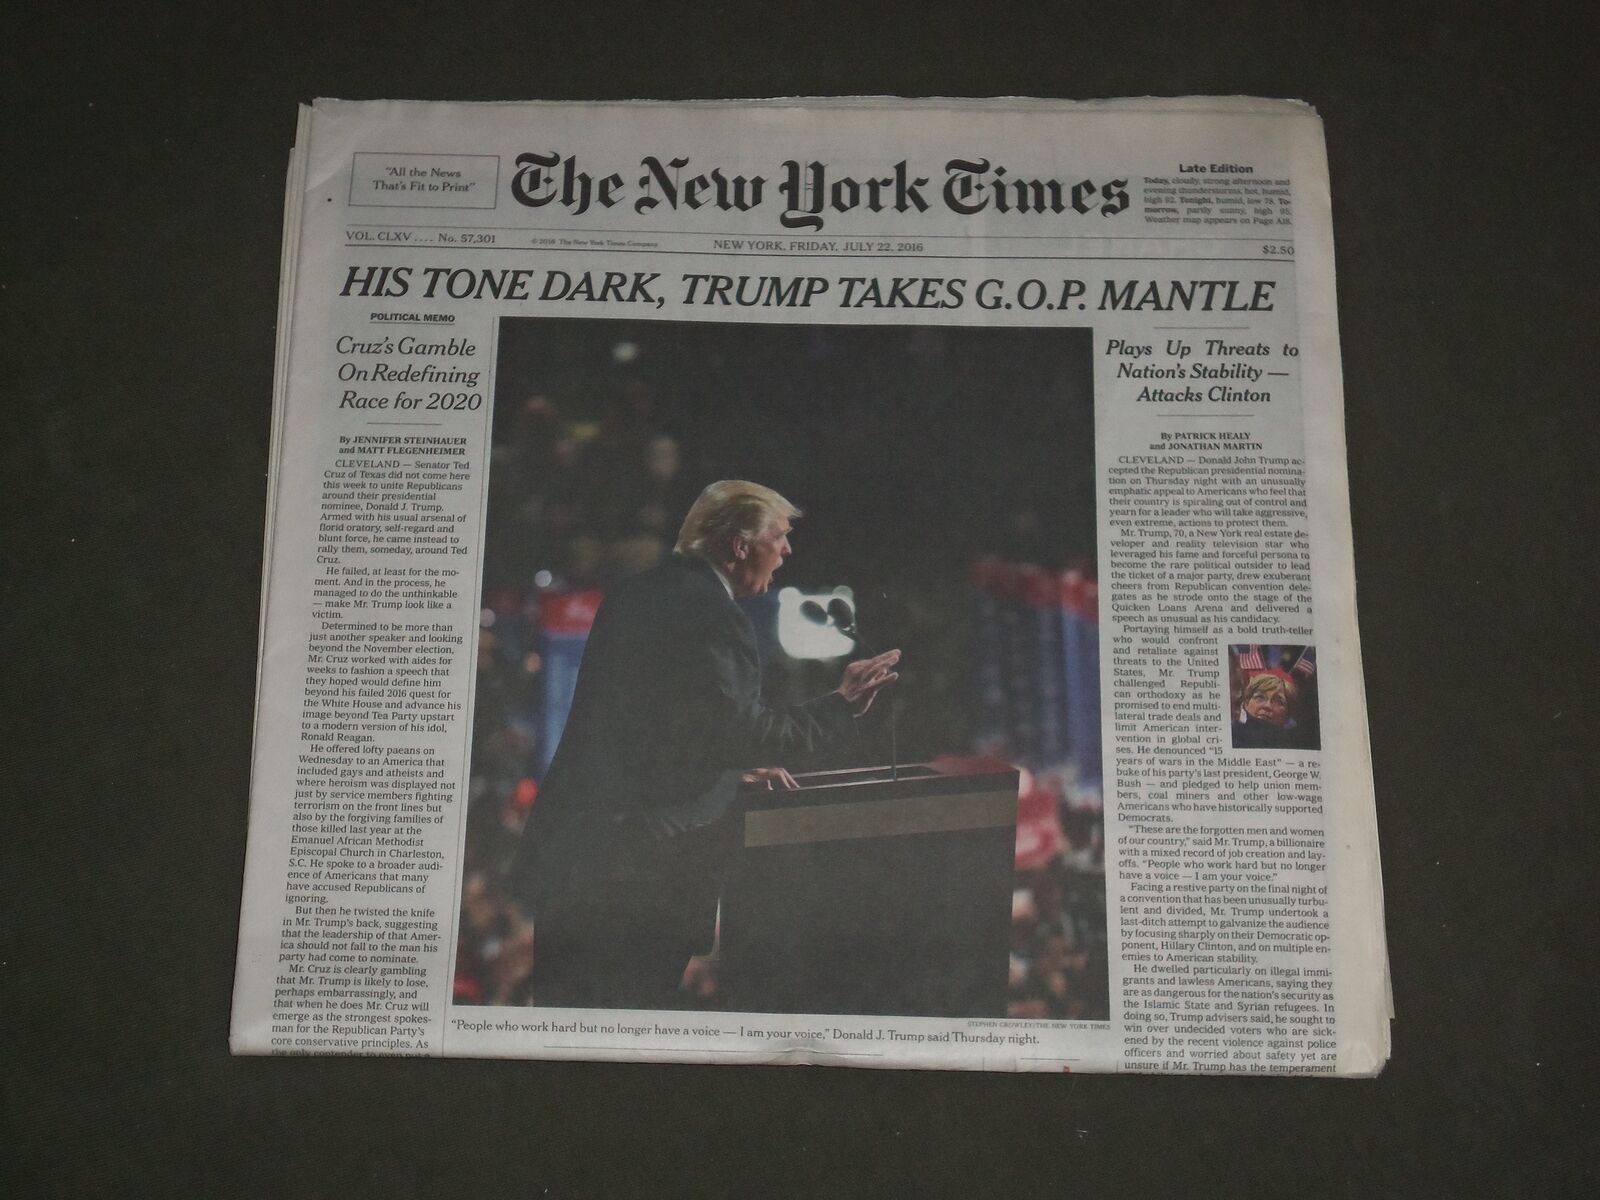 2016 JULY 22 NEW YORK TIMES - HIS TONE DARK, DONALD TRUMP TAKES GOP MANTLE